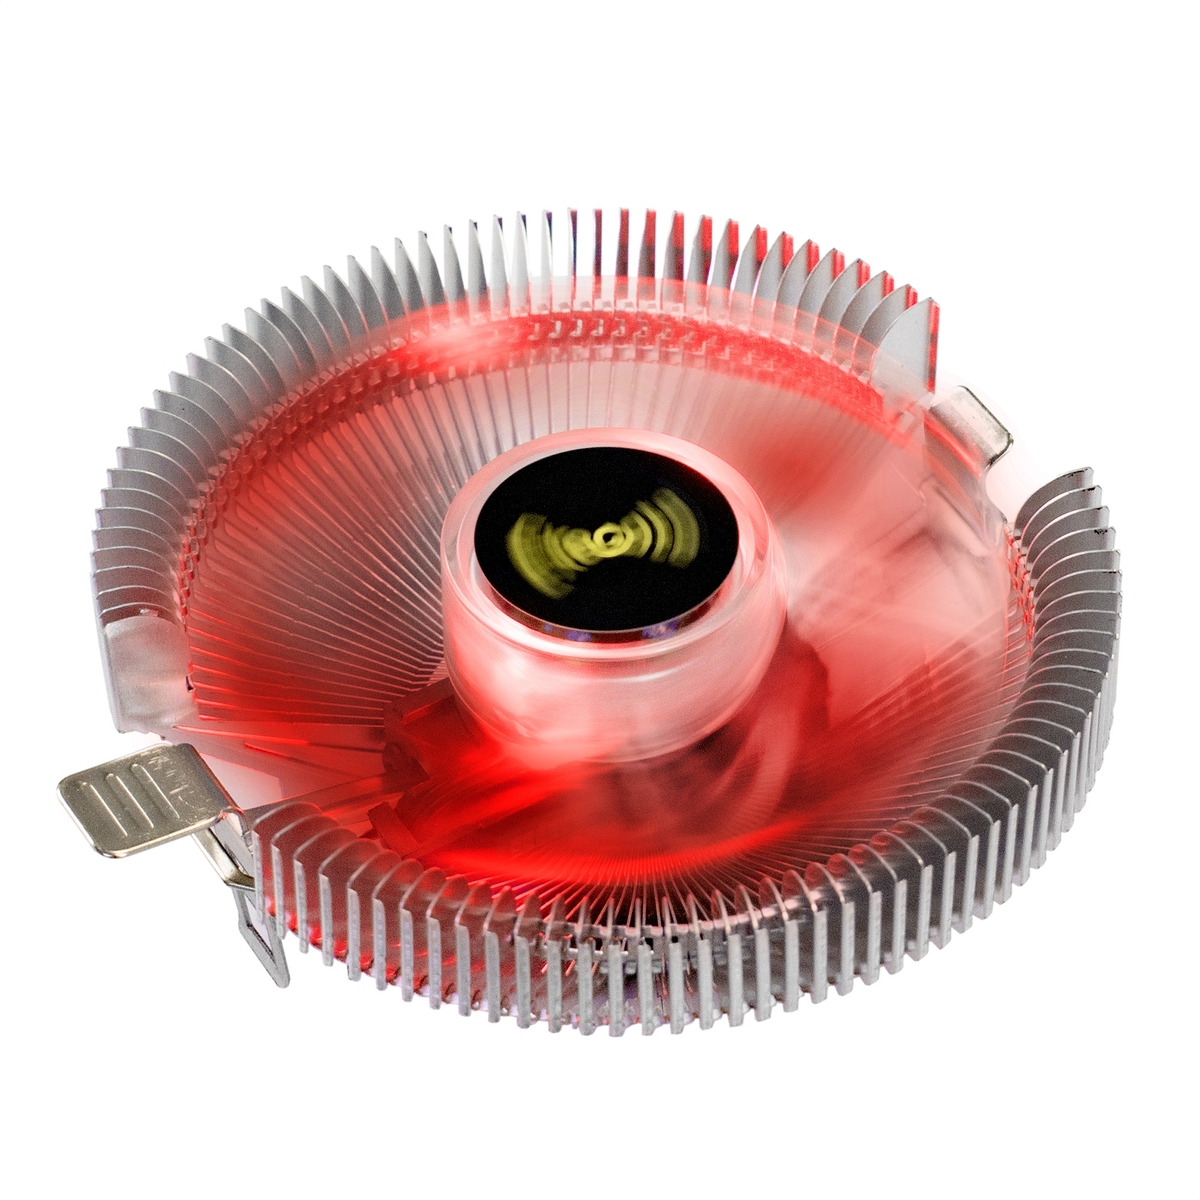 Cooler ExeGate Wizard EE91-RED